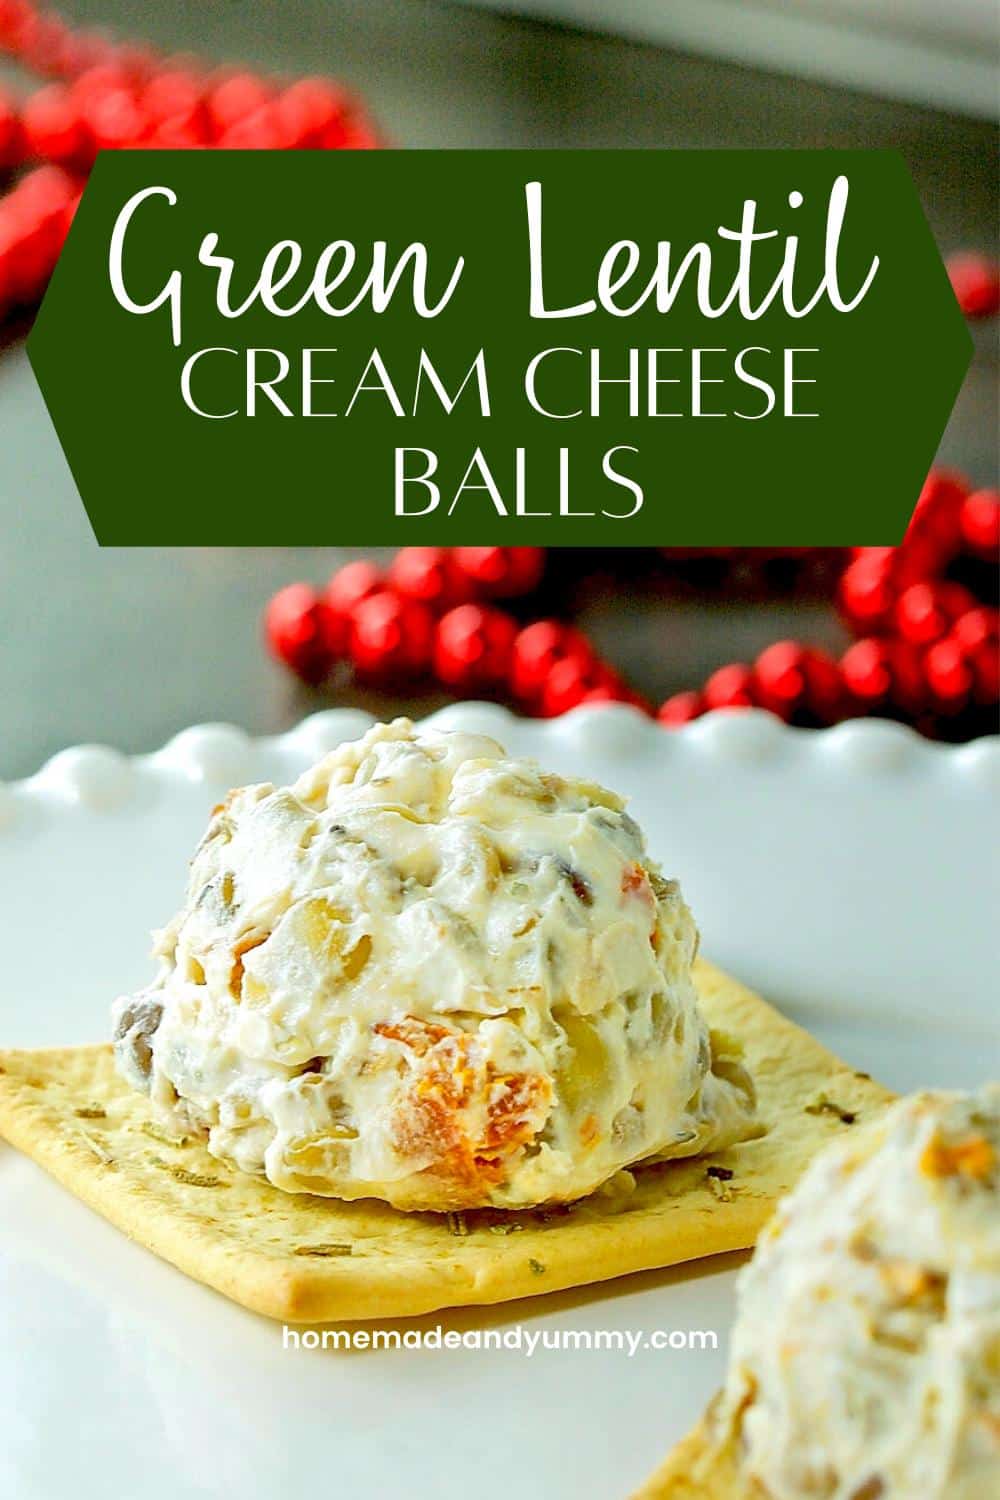 Mini cheese balls made with green lentils.